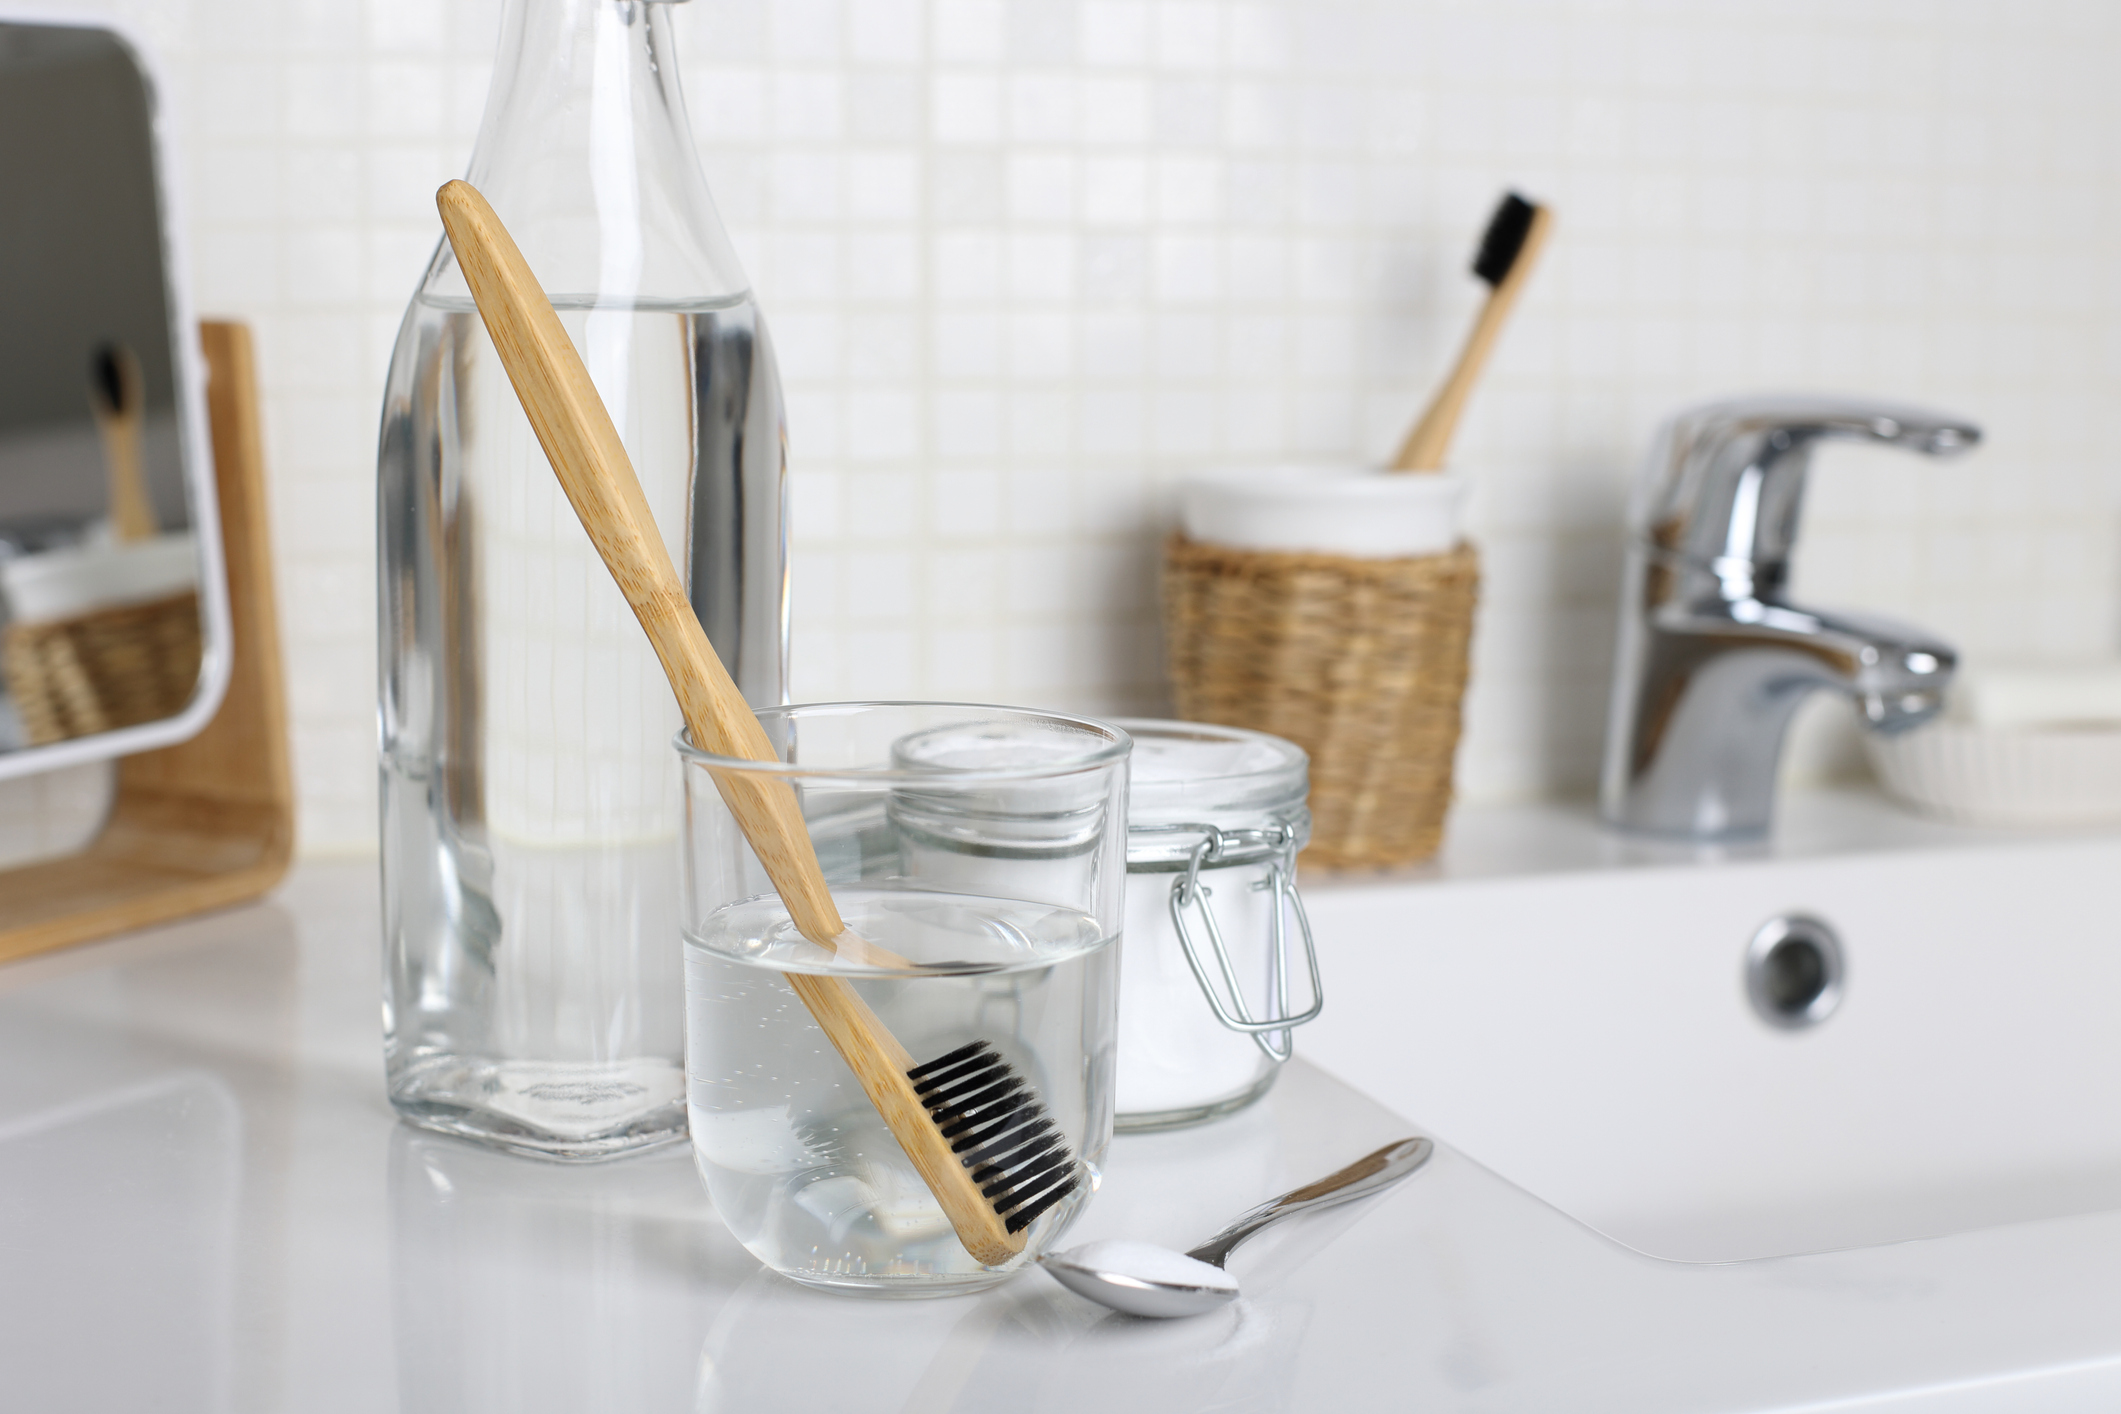 How To Clean a Toothbrush and Keep It Clean